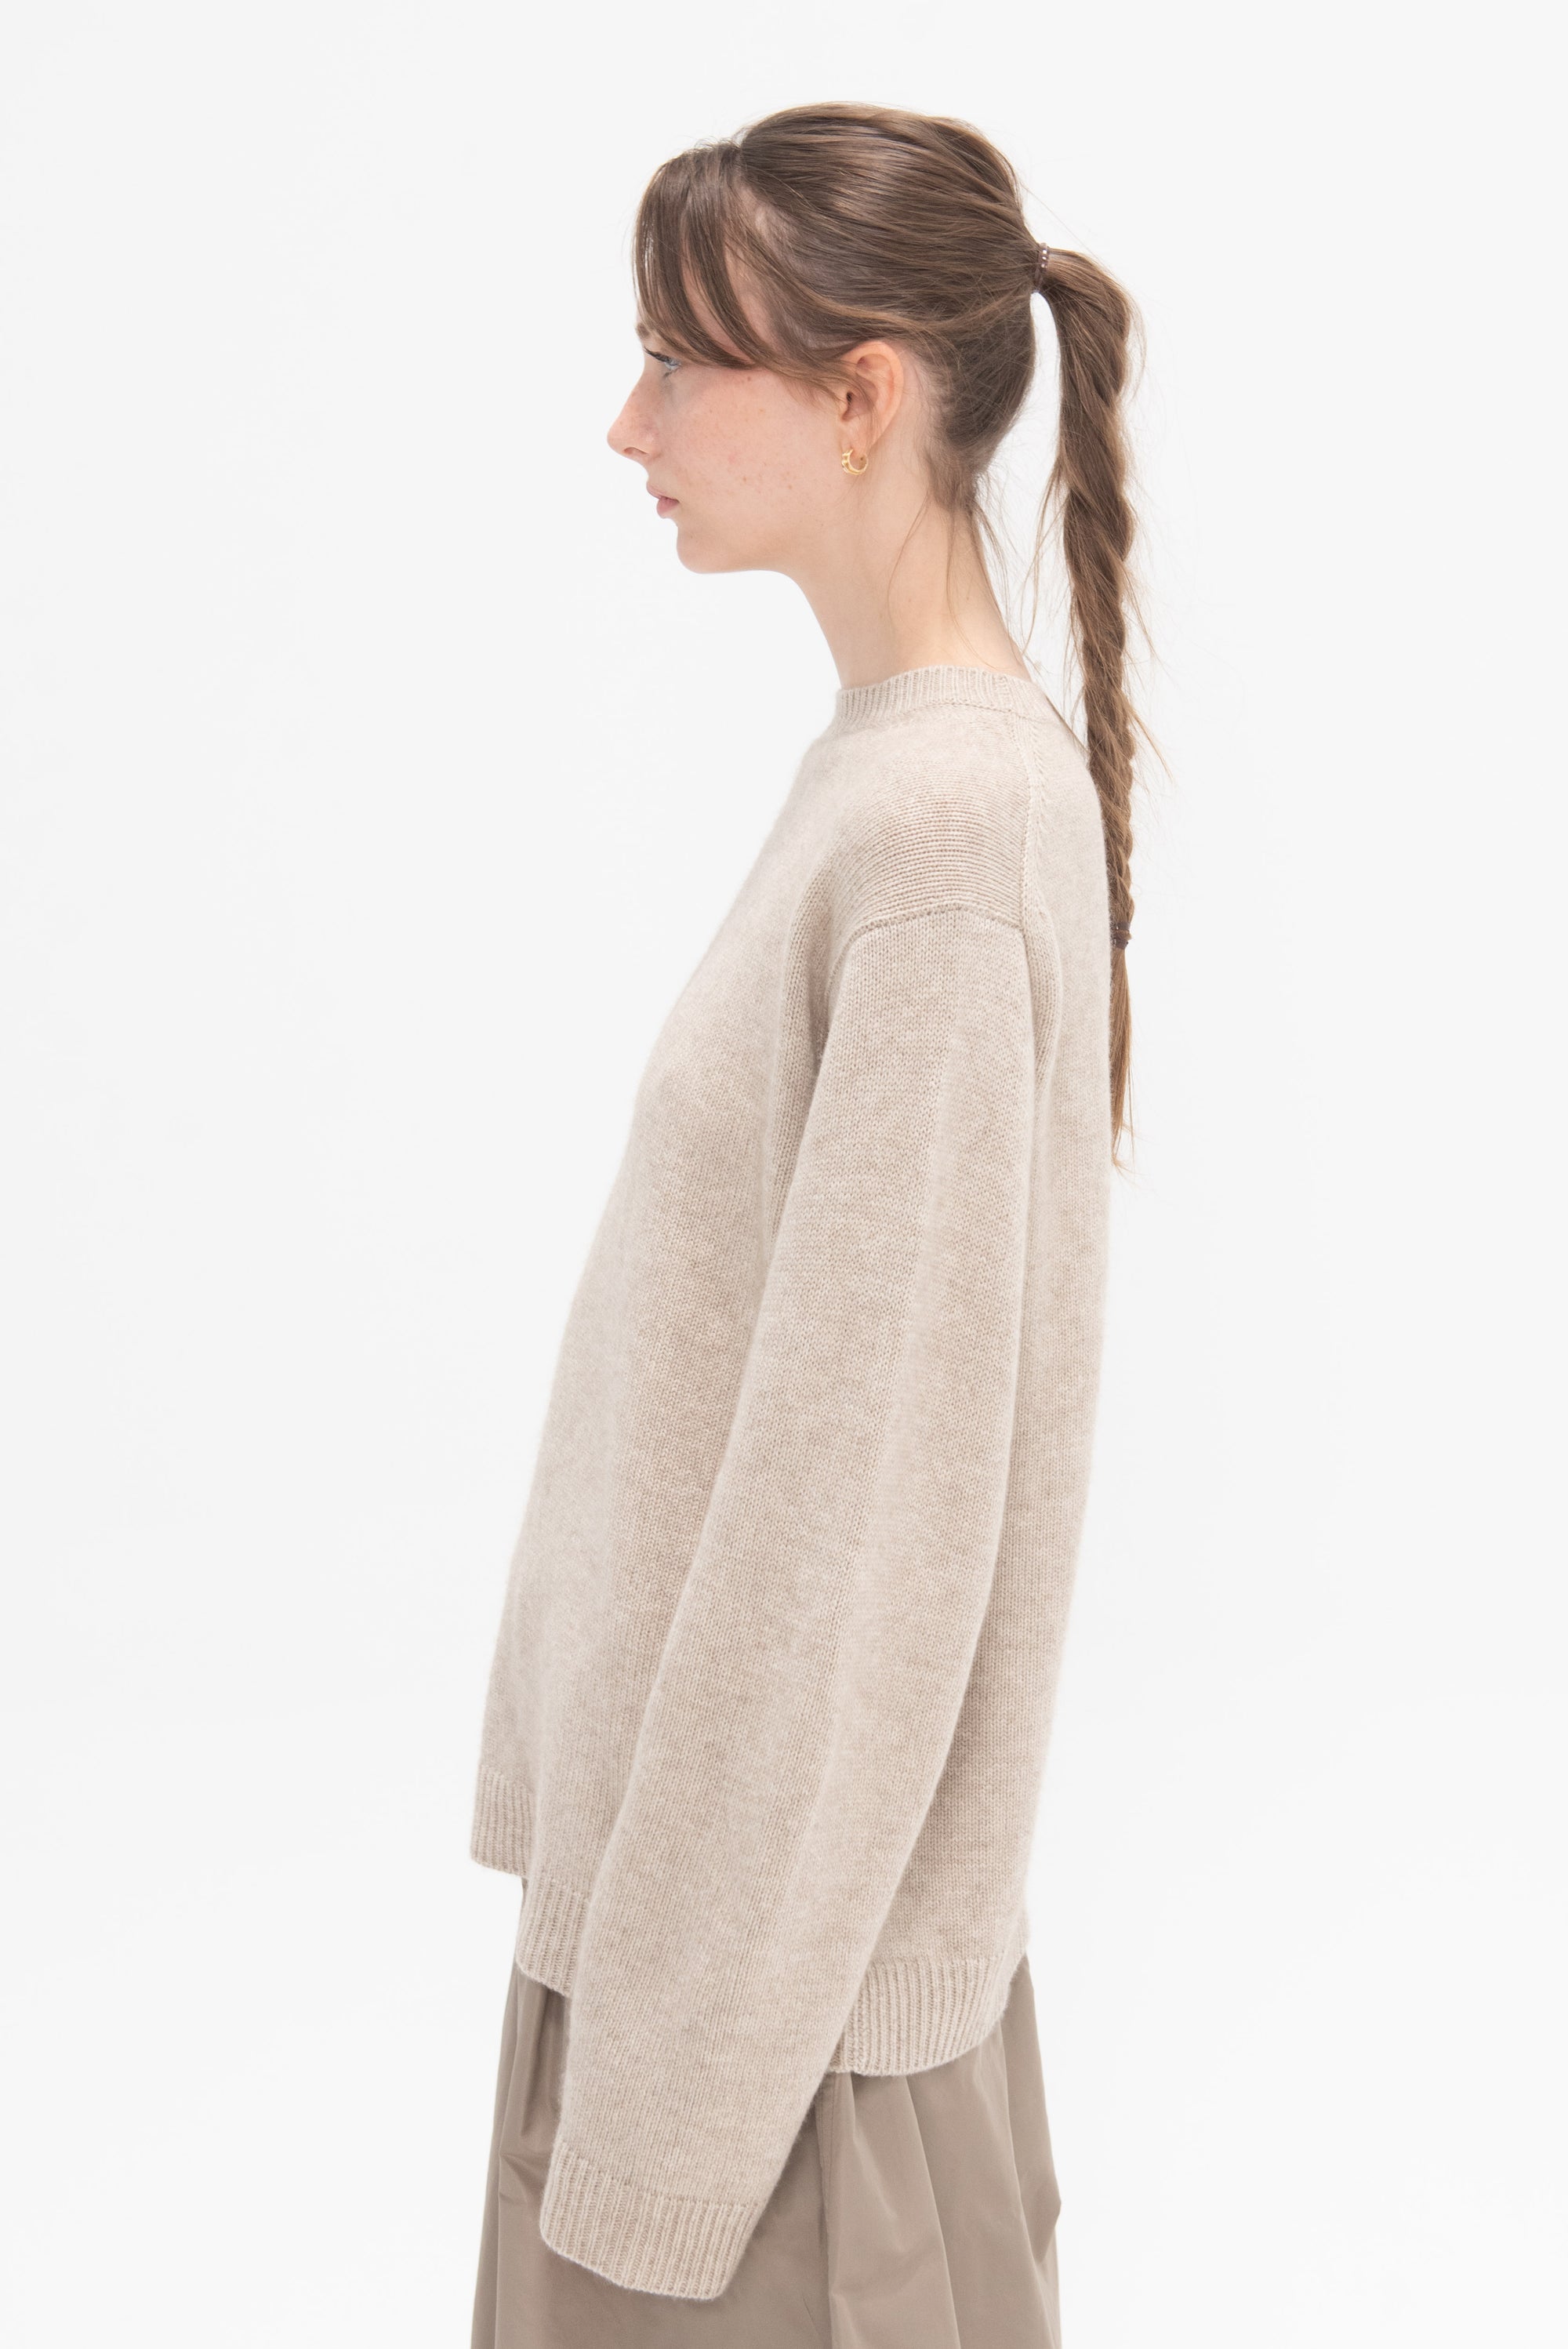 SOFIE D'HOORE - Moody Cashmere Sweater, Oatmeal